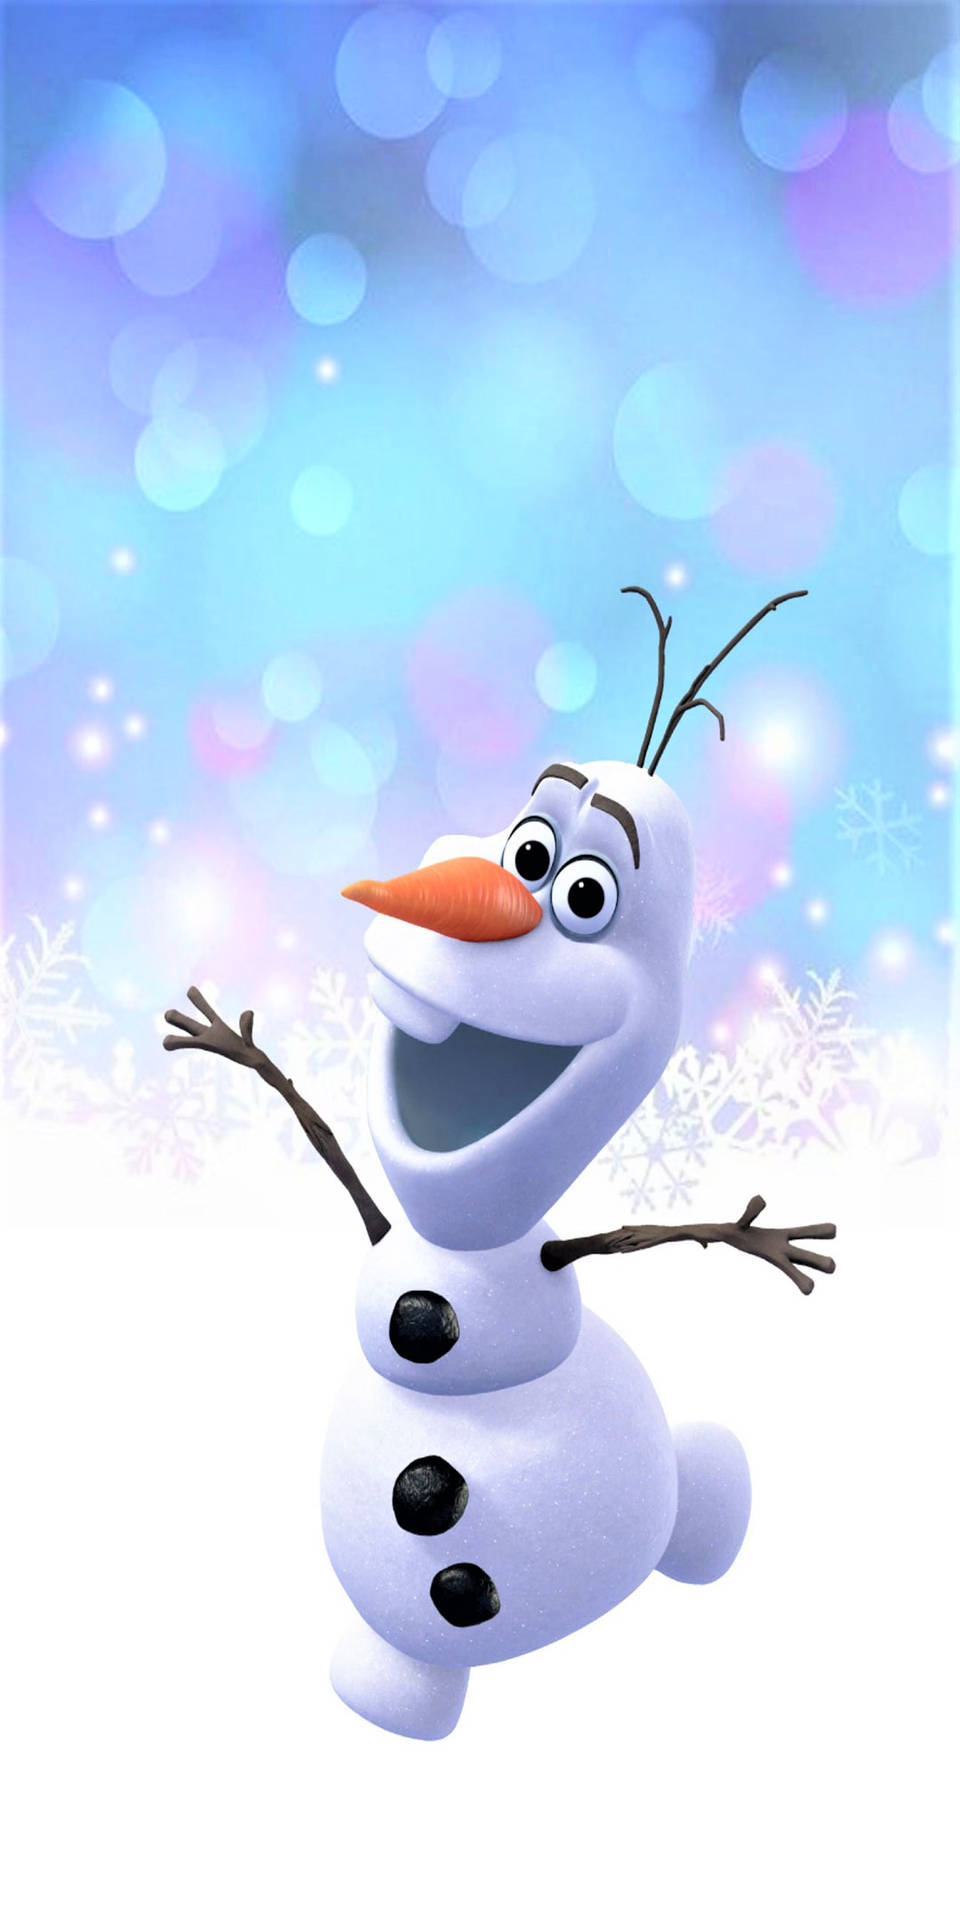 Free Olaf Wallpaper Downloads, [100+] Olaf Wallpapers for FREE | Wallpapers .com